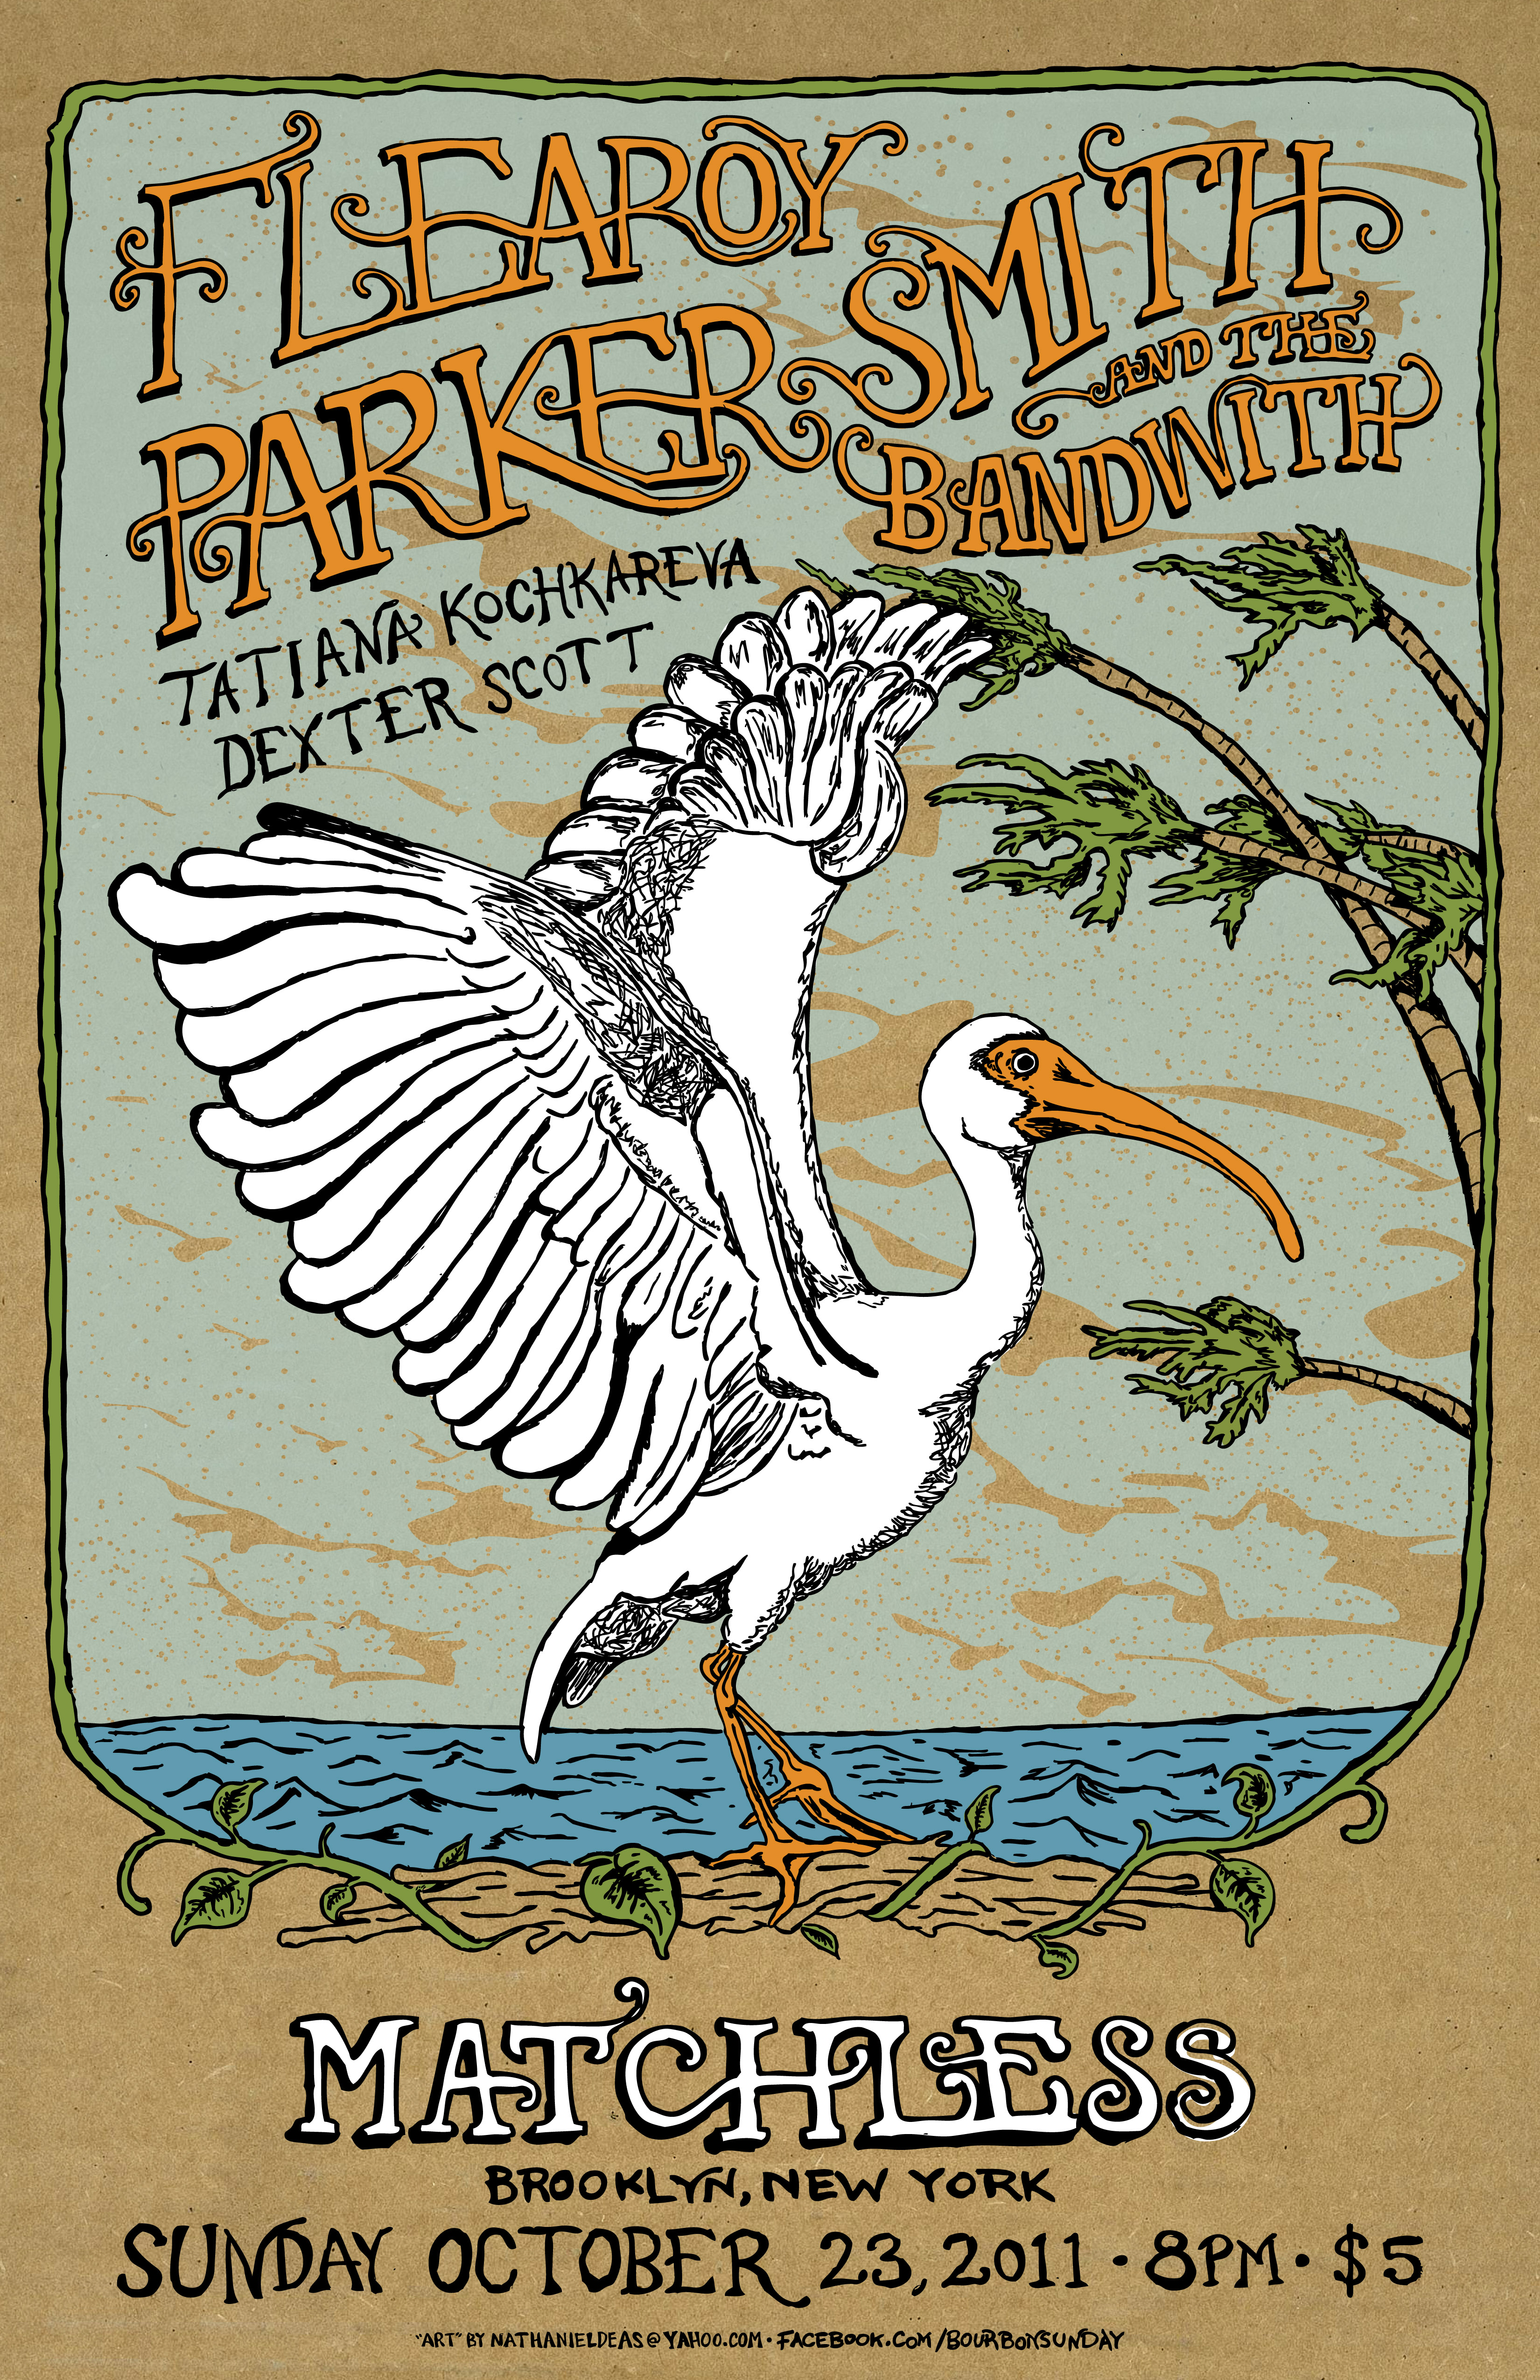 Parker Smith and the Bandwith “Ibis” Poster